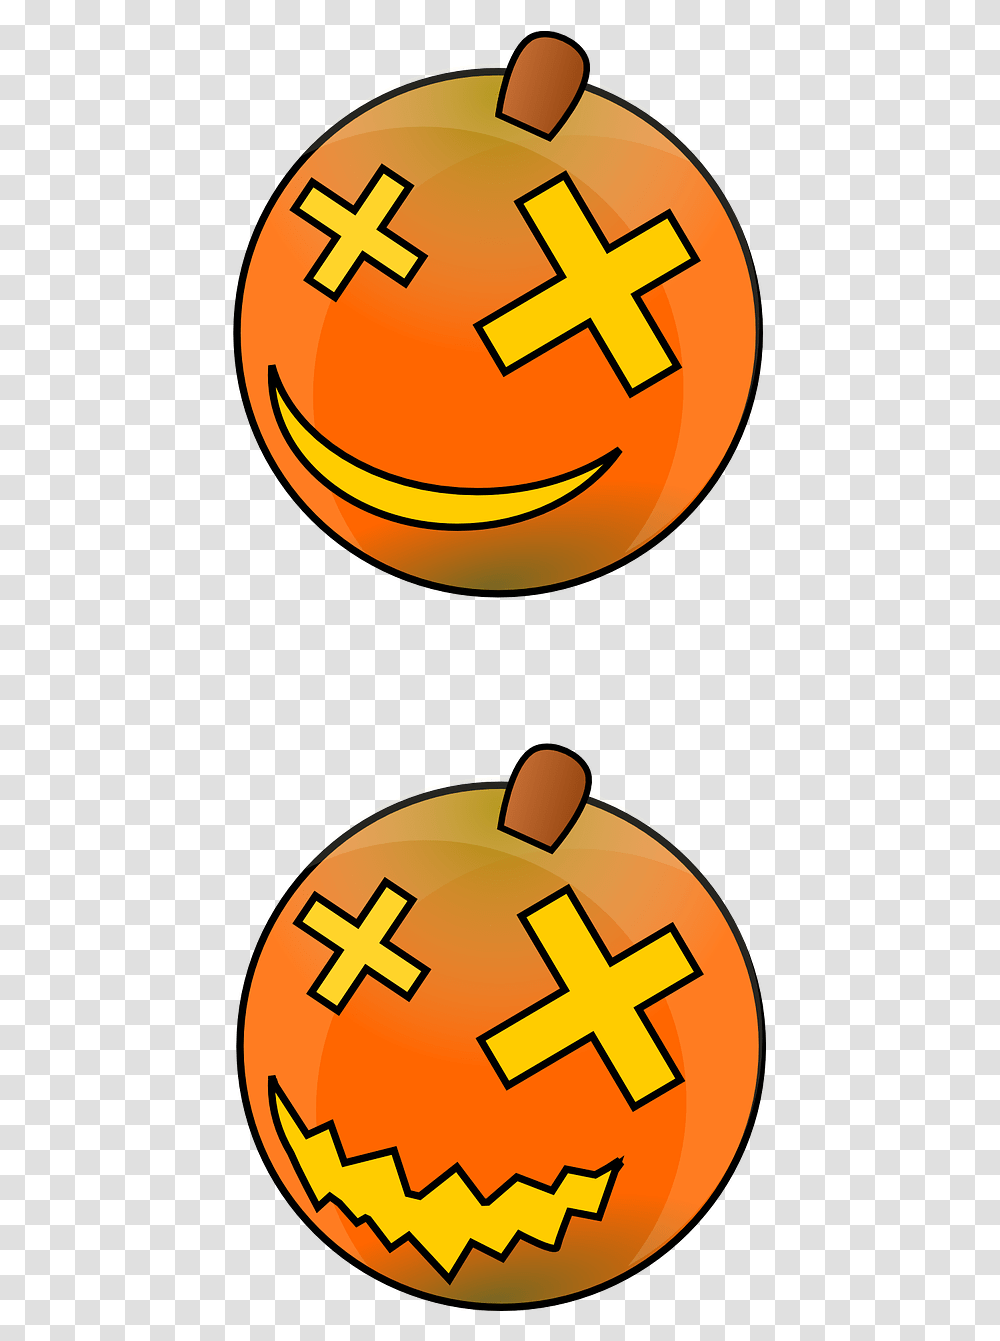 Pumpkin Face Happy Free Vector Graphic On Pixabay Pumpkin, Plant, Produce, Food, Halloween Transparent Png